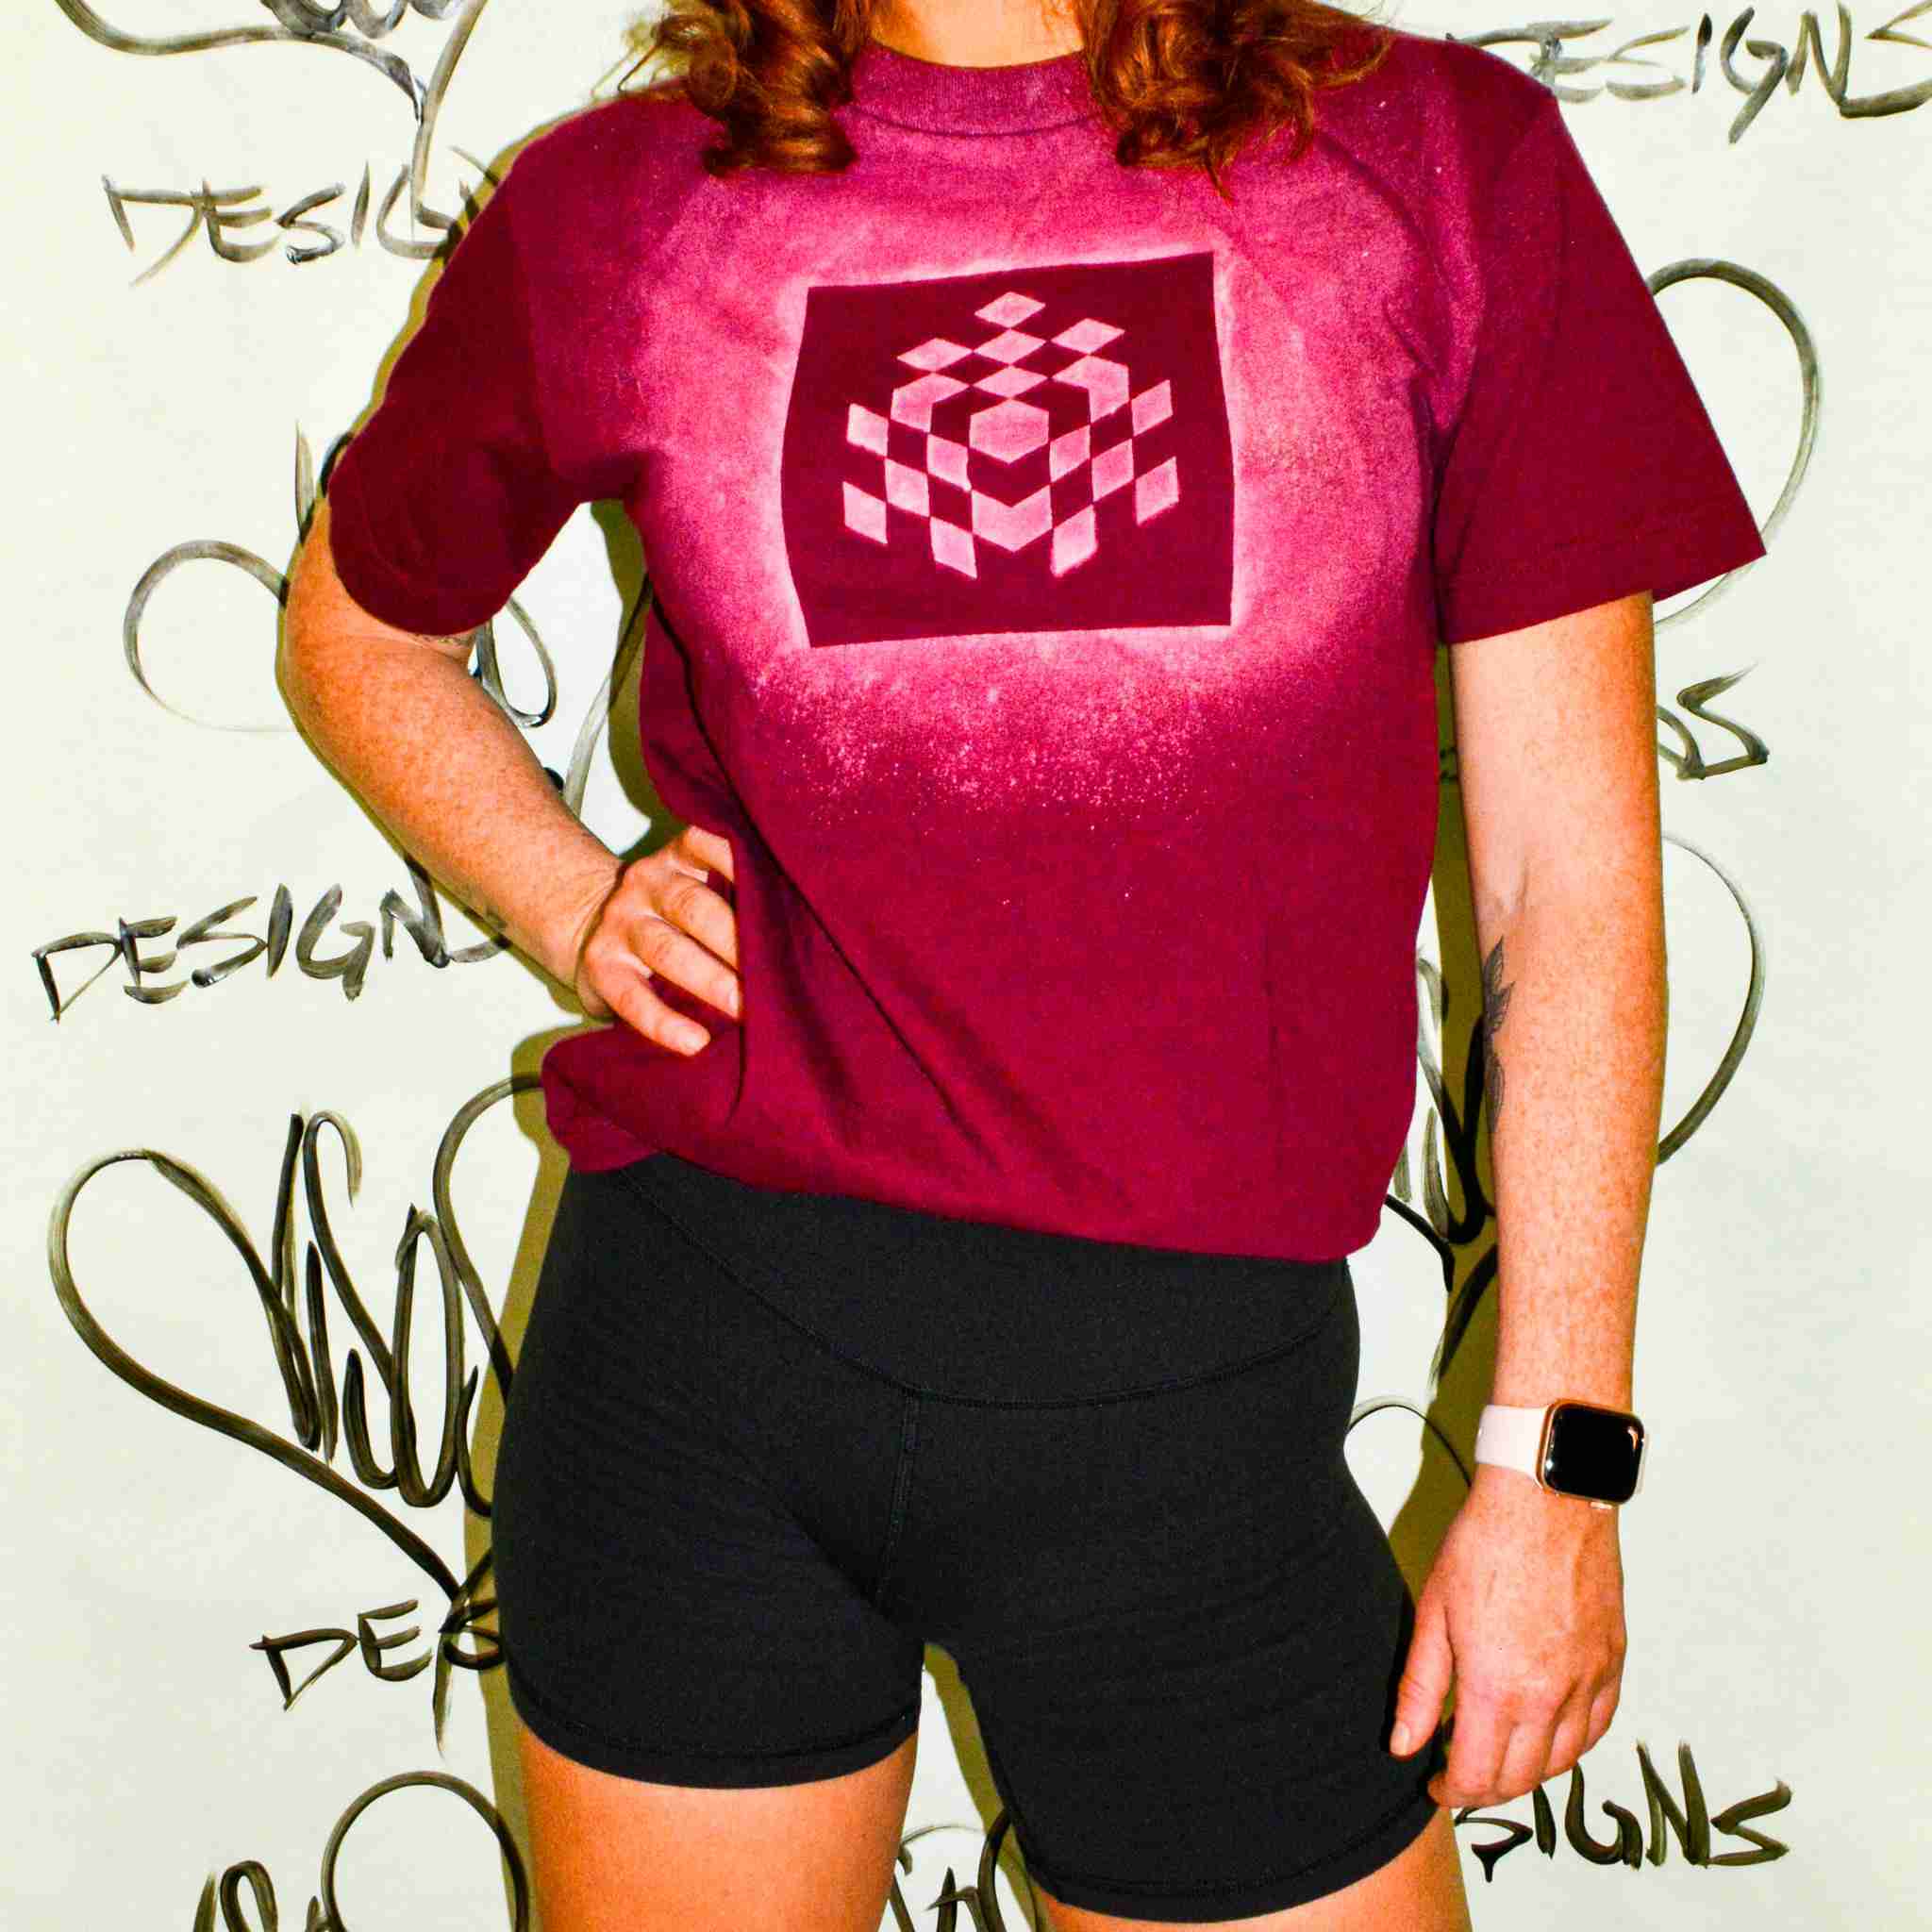 a woman wearing a red shirt and black shorts.